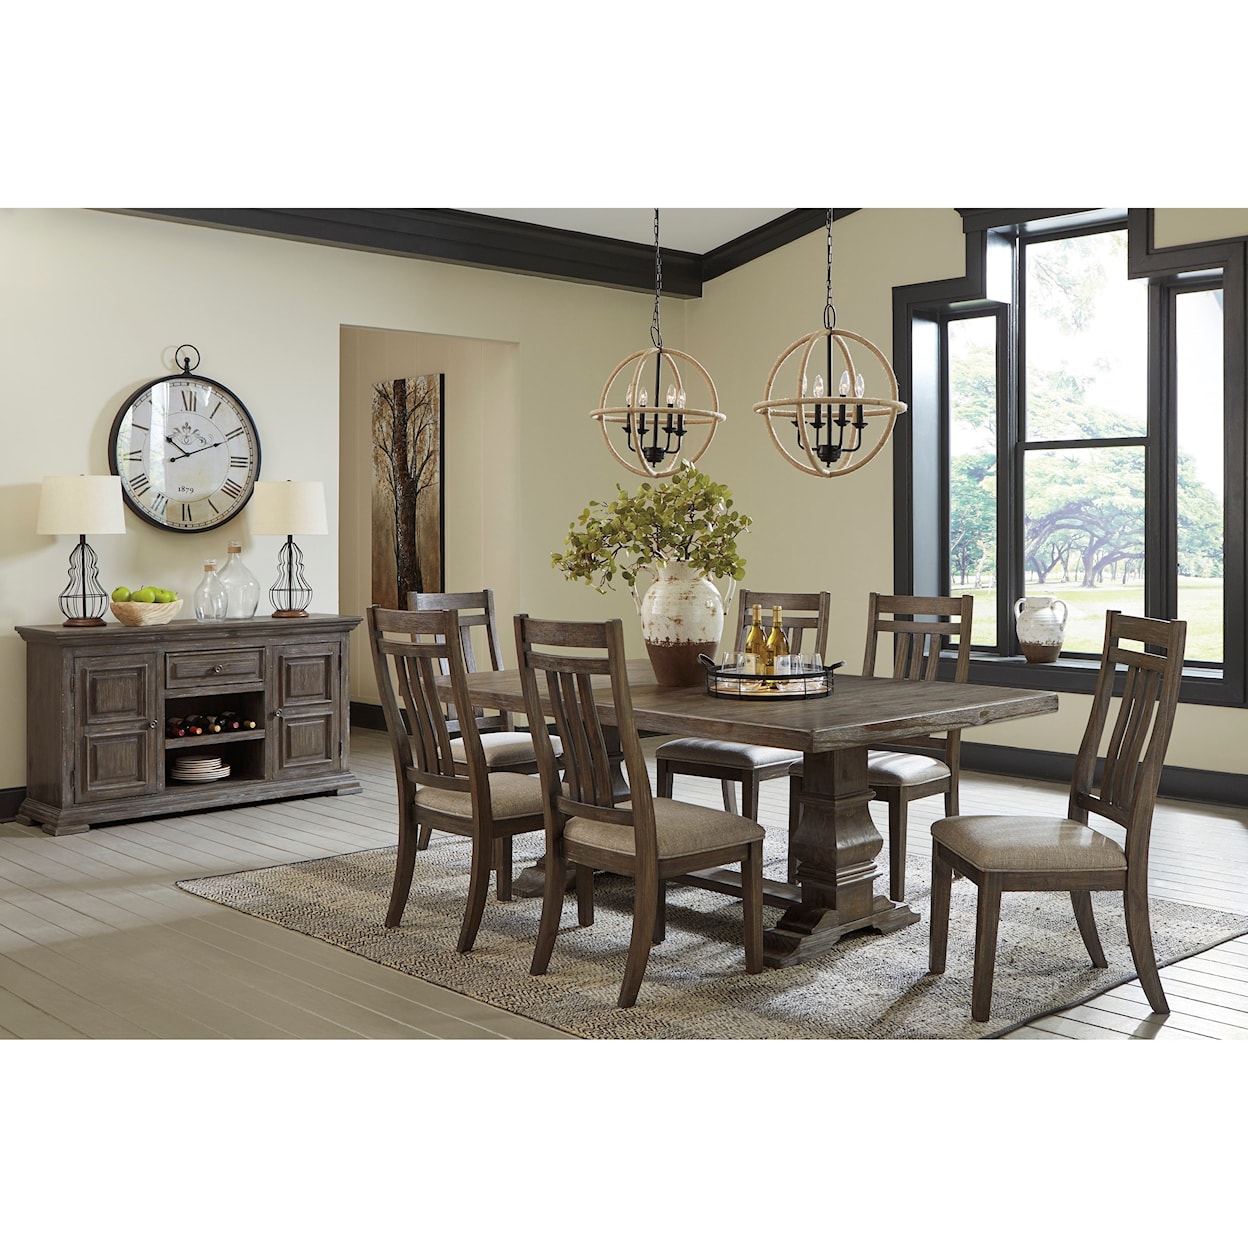 Signature Design by Ashley Furniture Wyndahl Dining Room Group